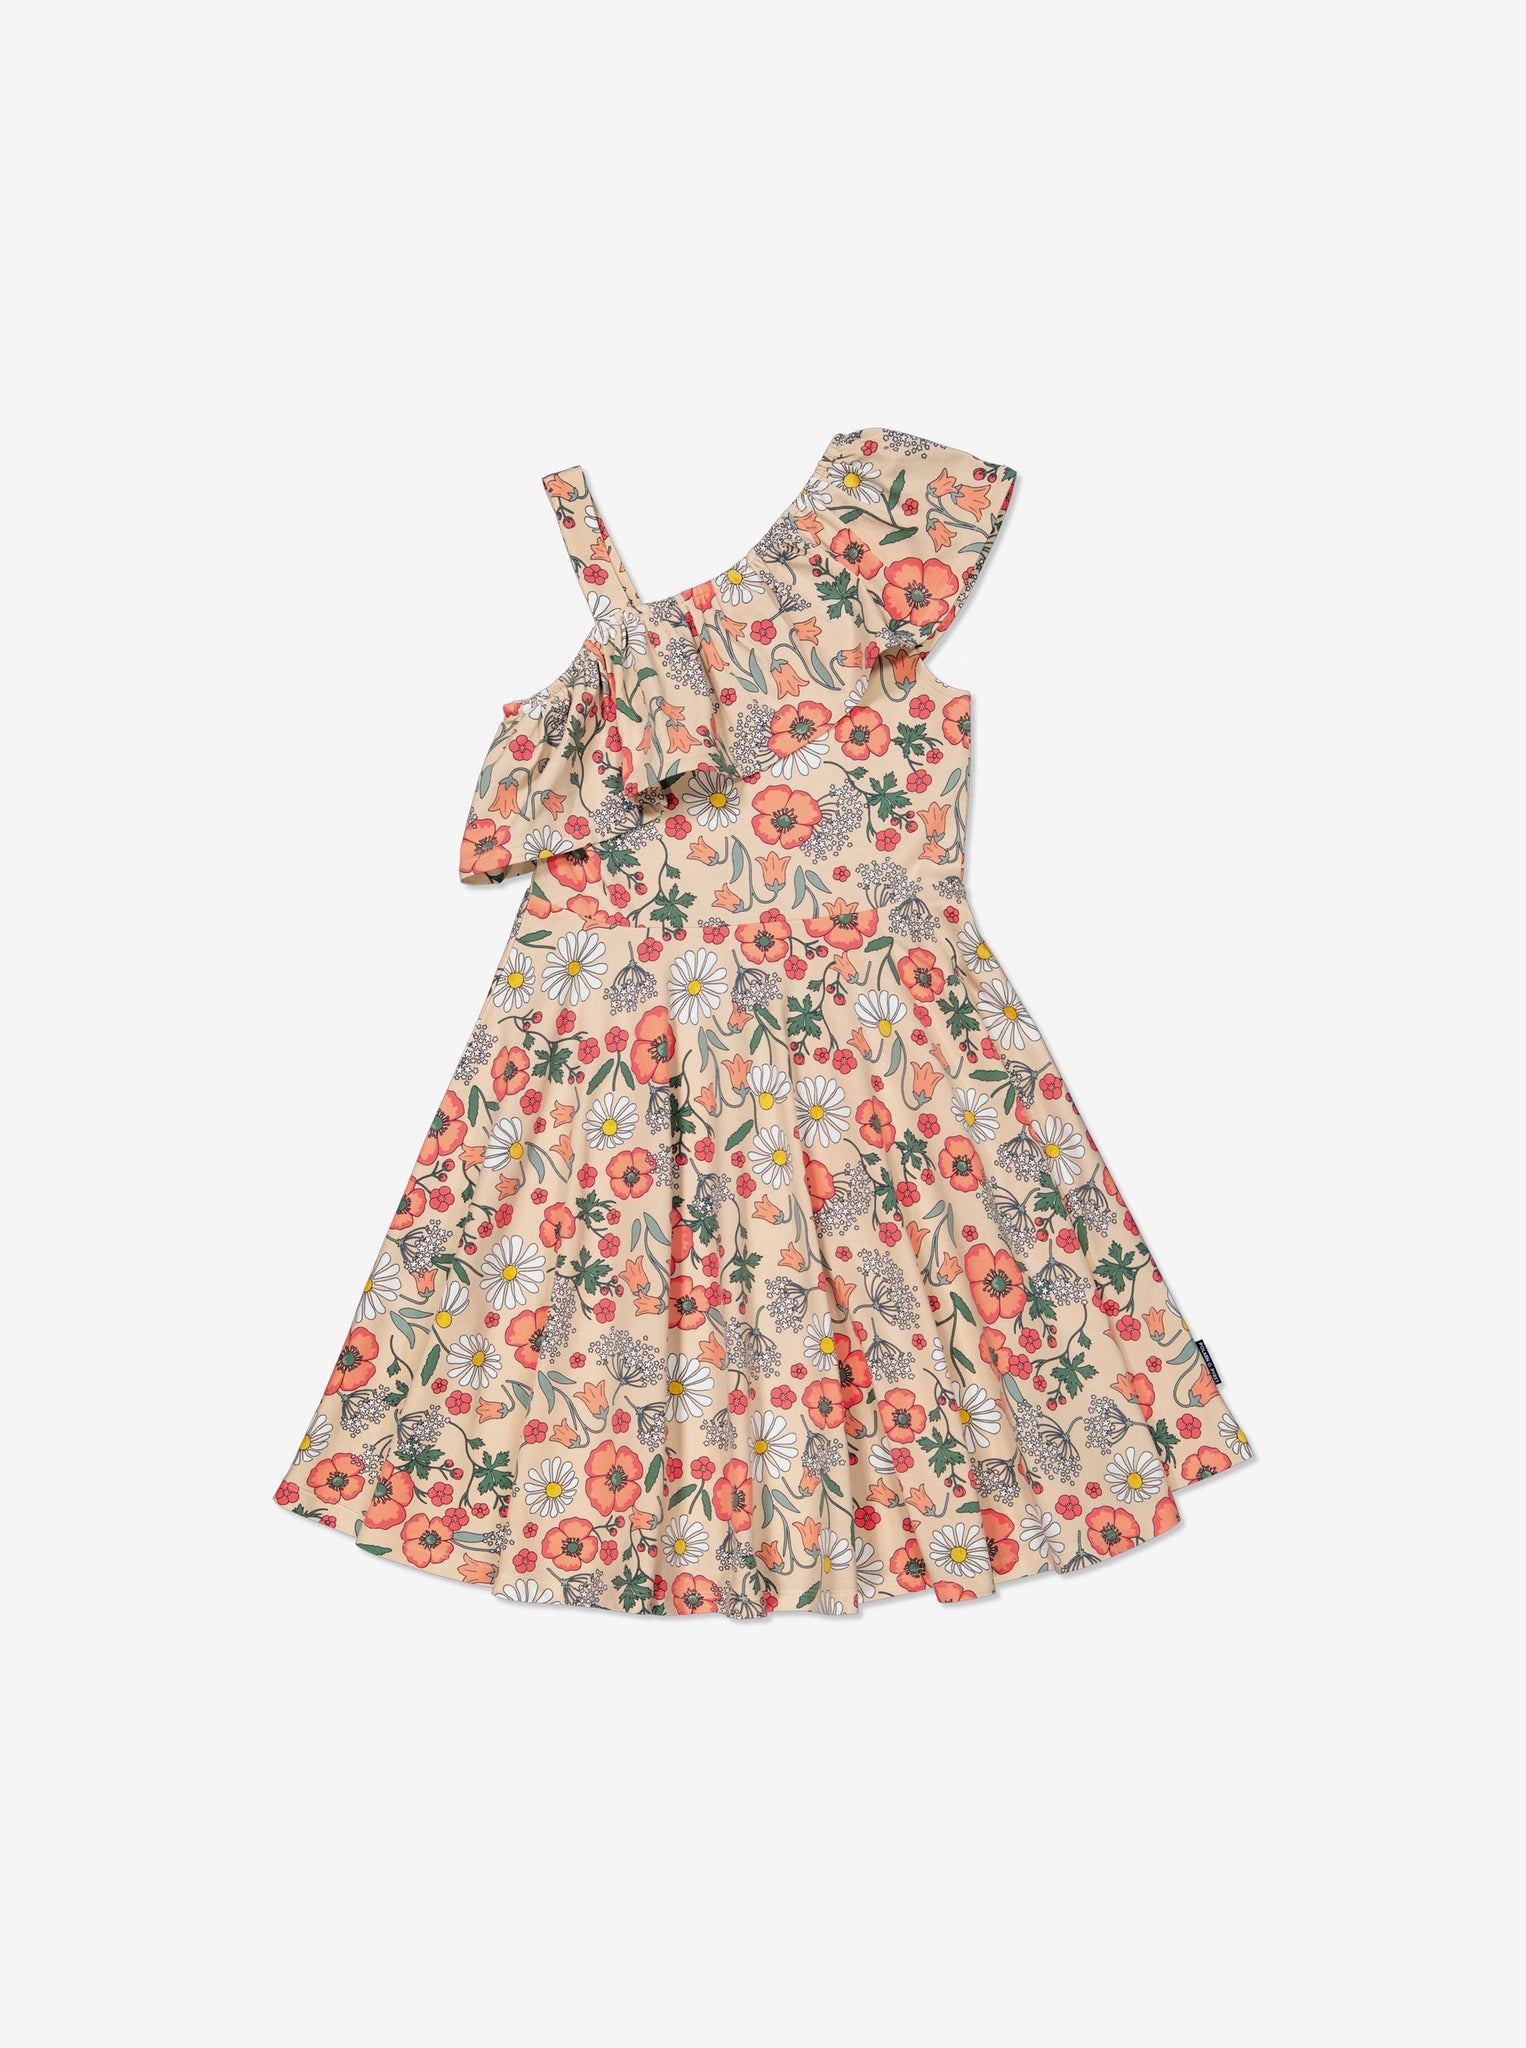 Organic Cotton Floral Kids Dress from Polarn O. Pyret Kidswear. Made from ethically sourced materials.